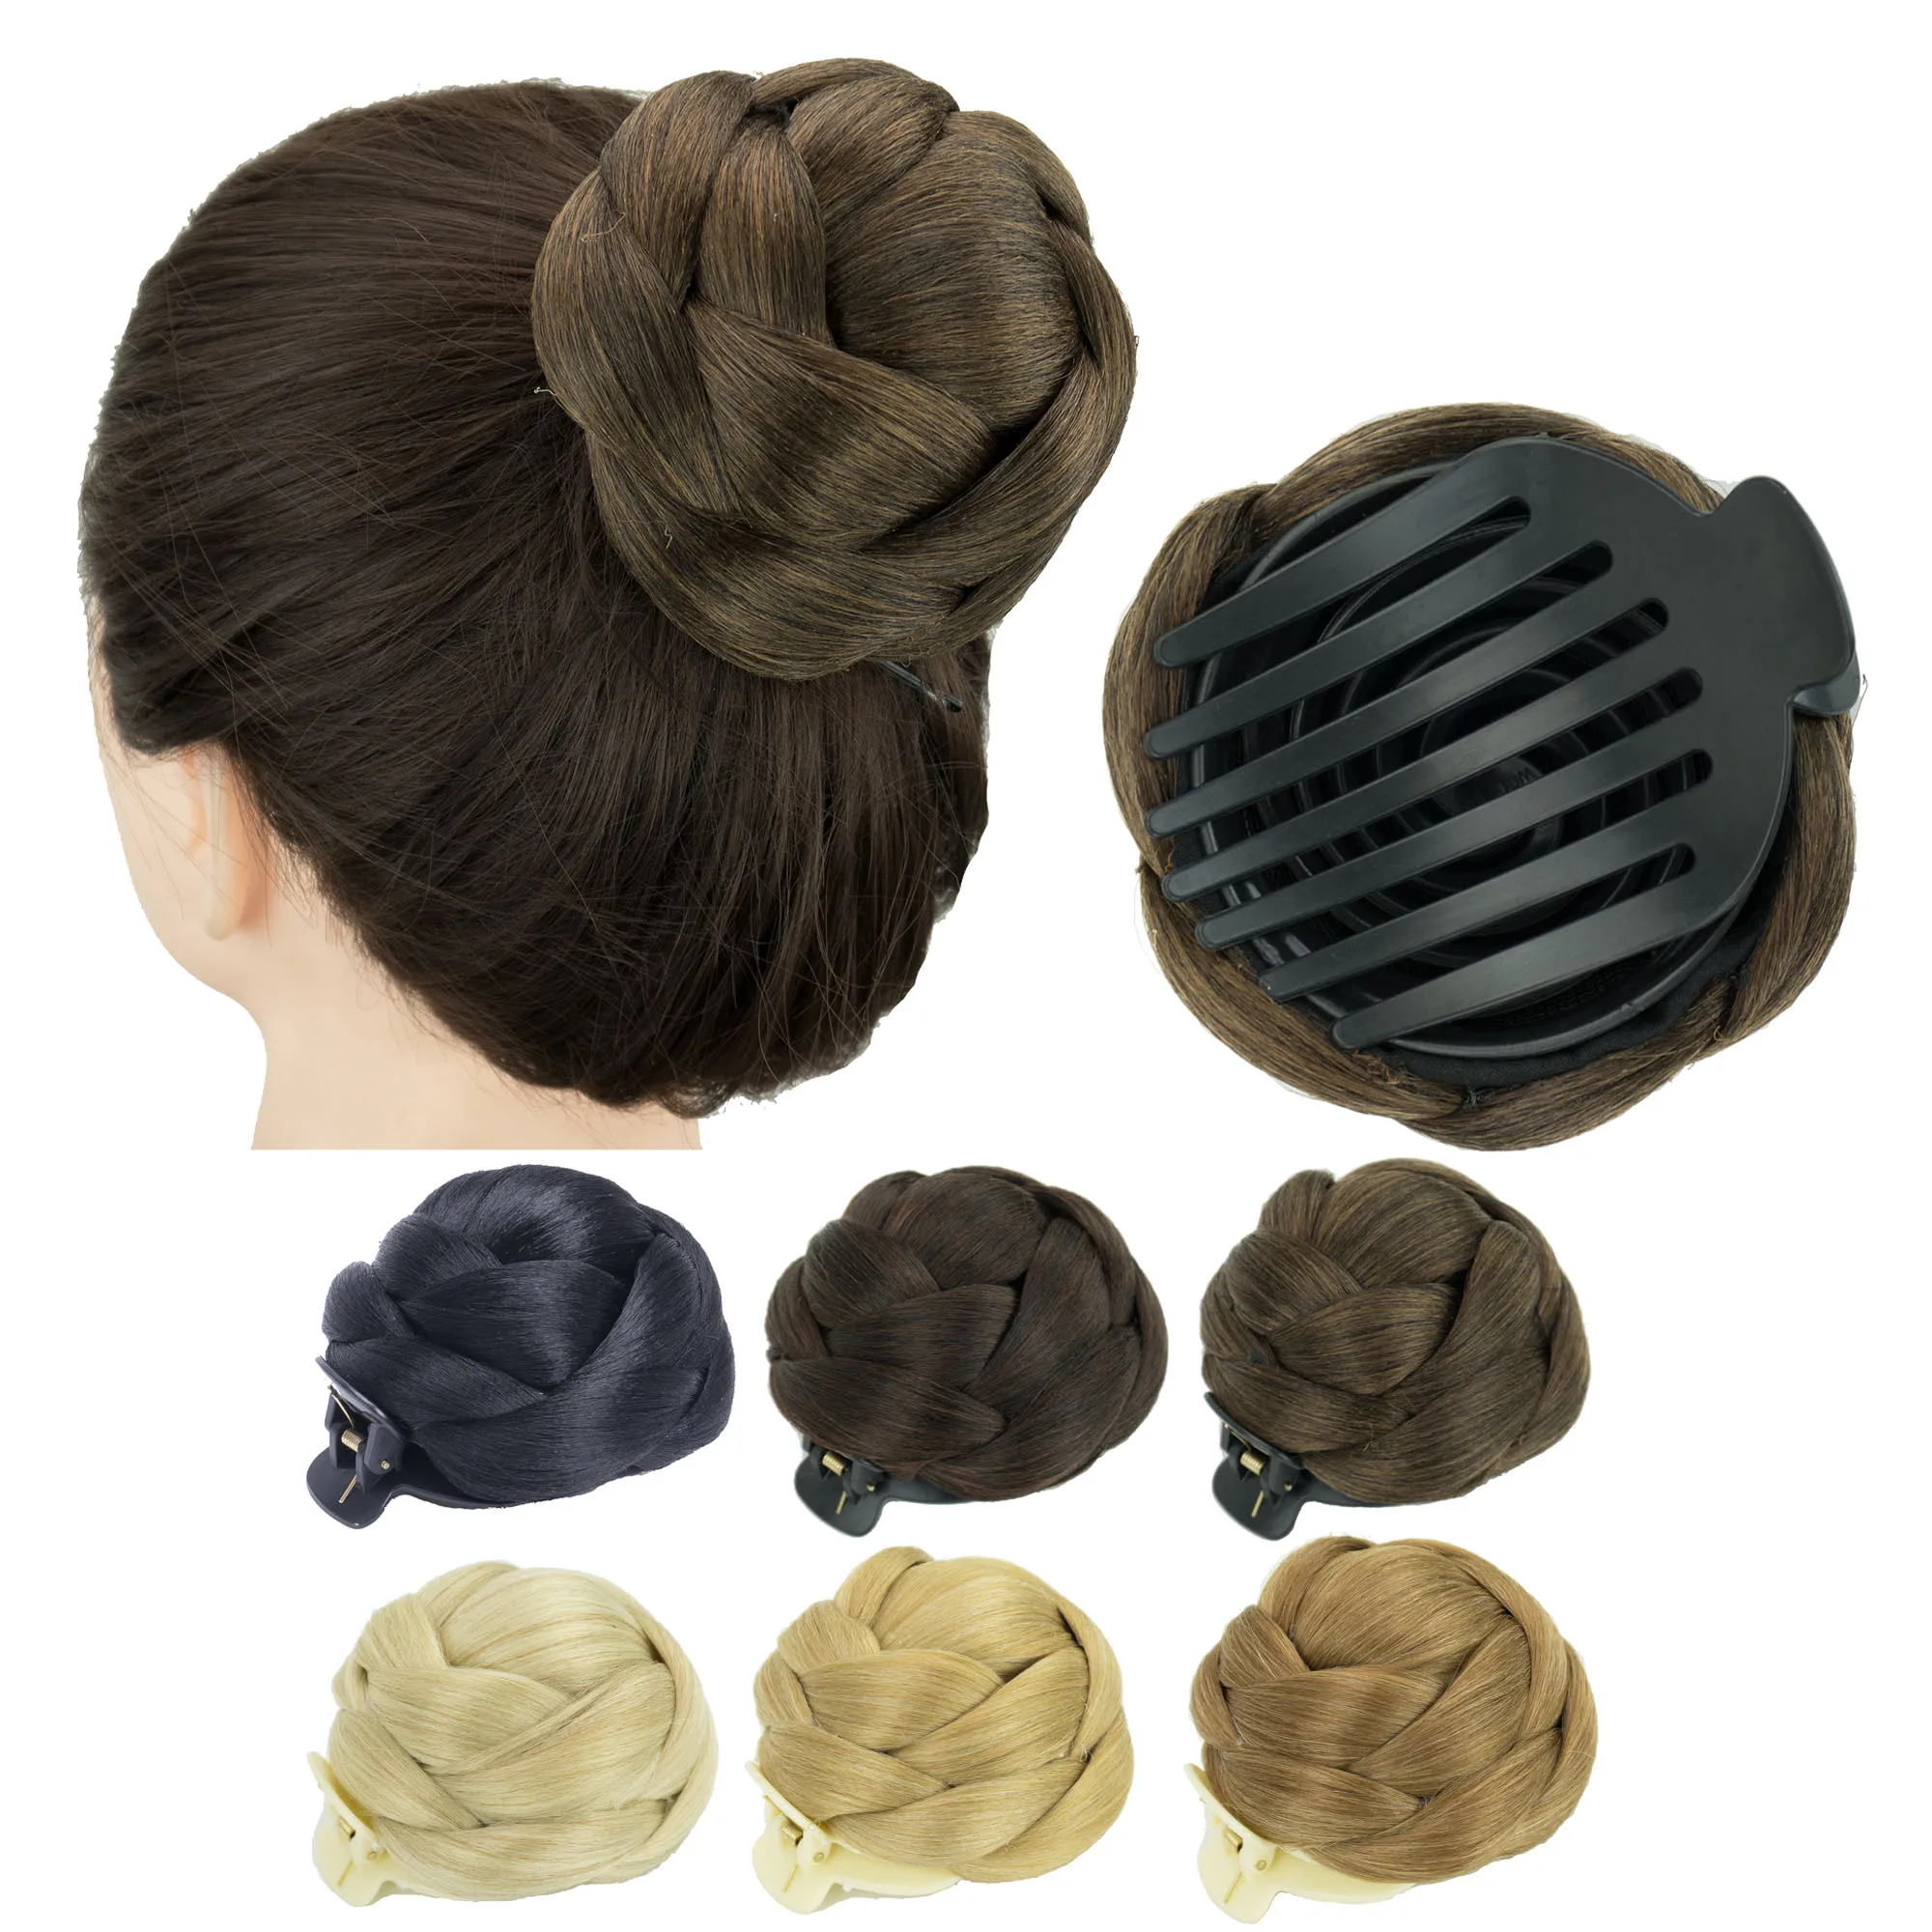 Soowee Synthetic Hair Braided Chignon Hair Comb Clip Donut Hairpieces Scrunchie Claw Hair Buns Cover Updo for Kid and Women